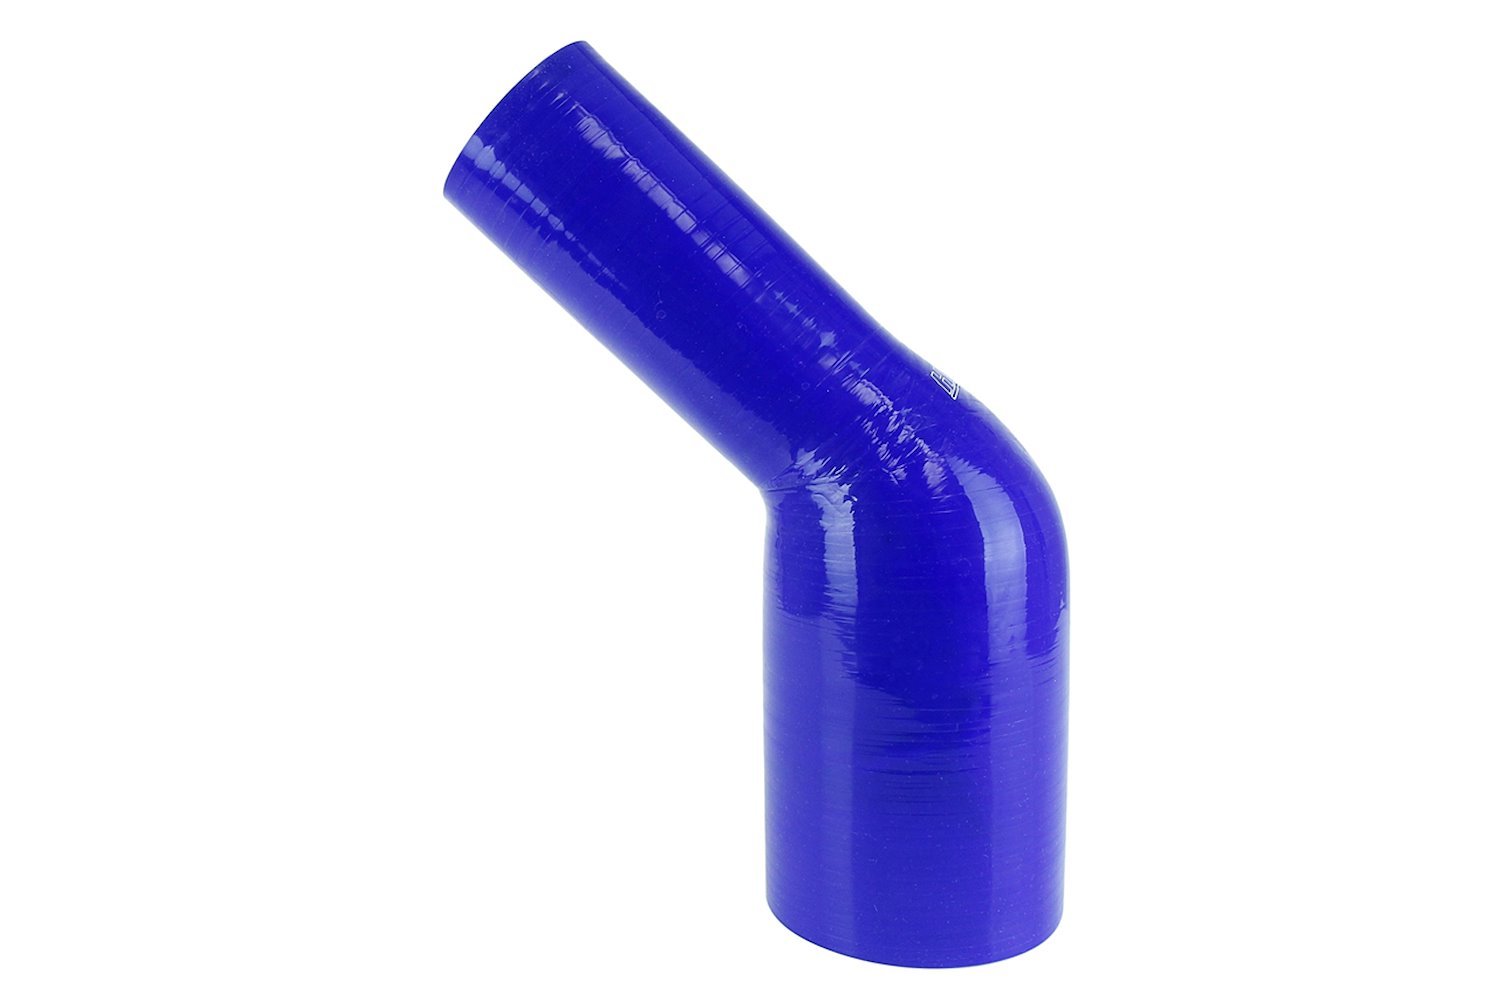 HTSER45-250-350-BLUE Silicone 45-Degree Elbow Hose, High-Temp 4-Ply Reinforced, 2-1/2 in. - 3-1/2 in. ID, Blue